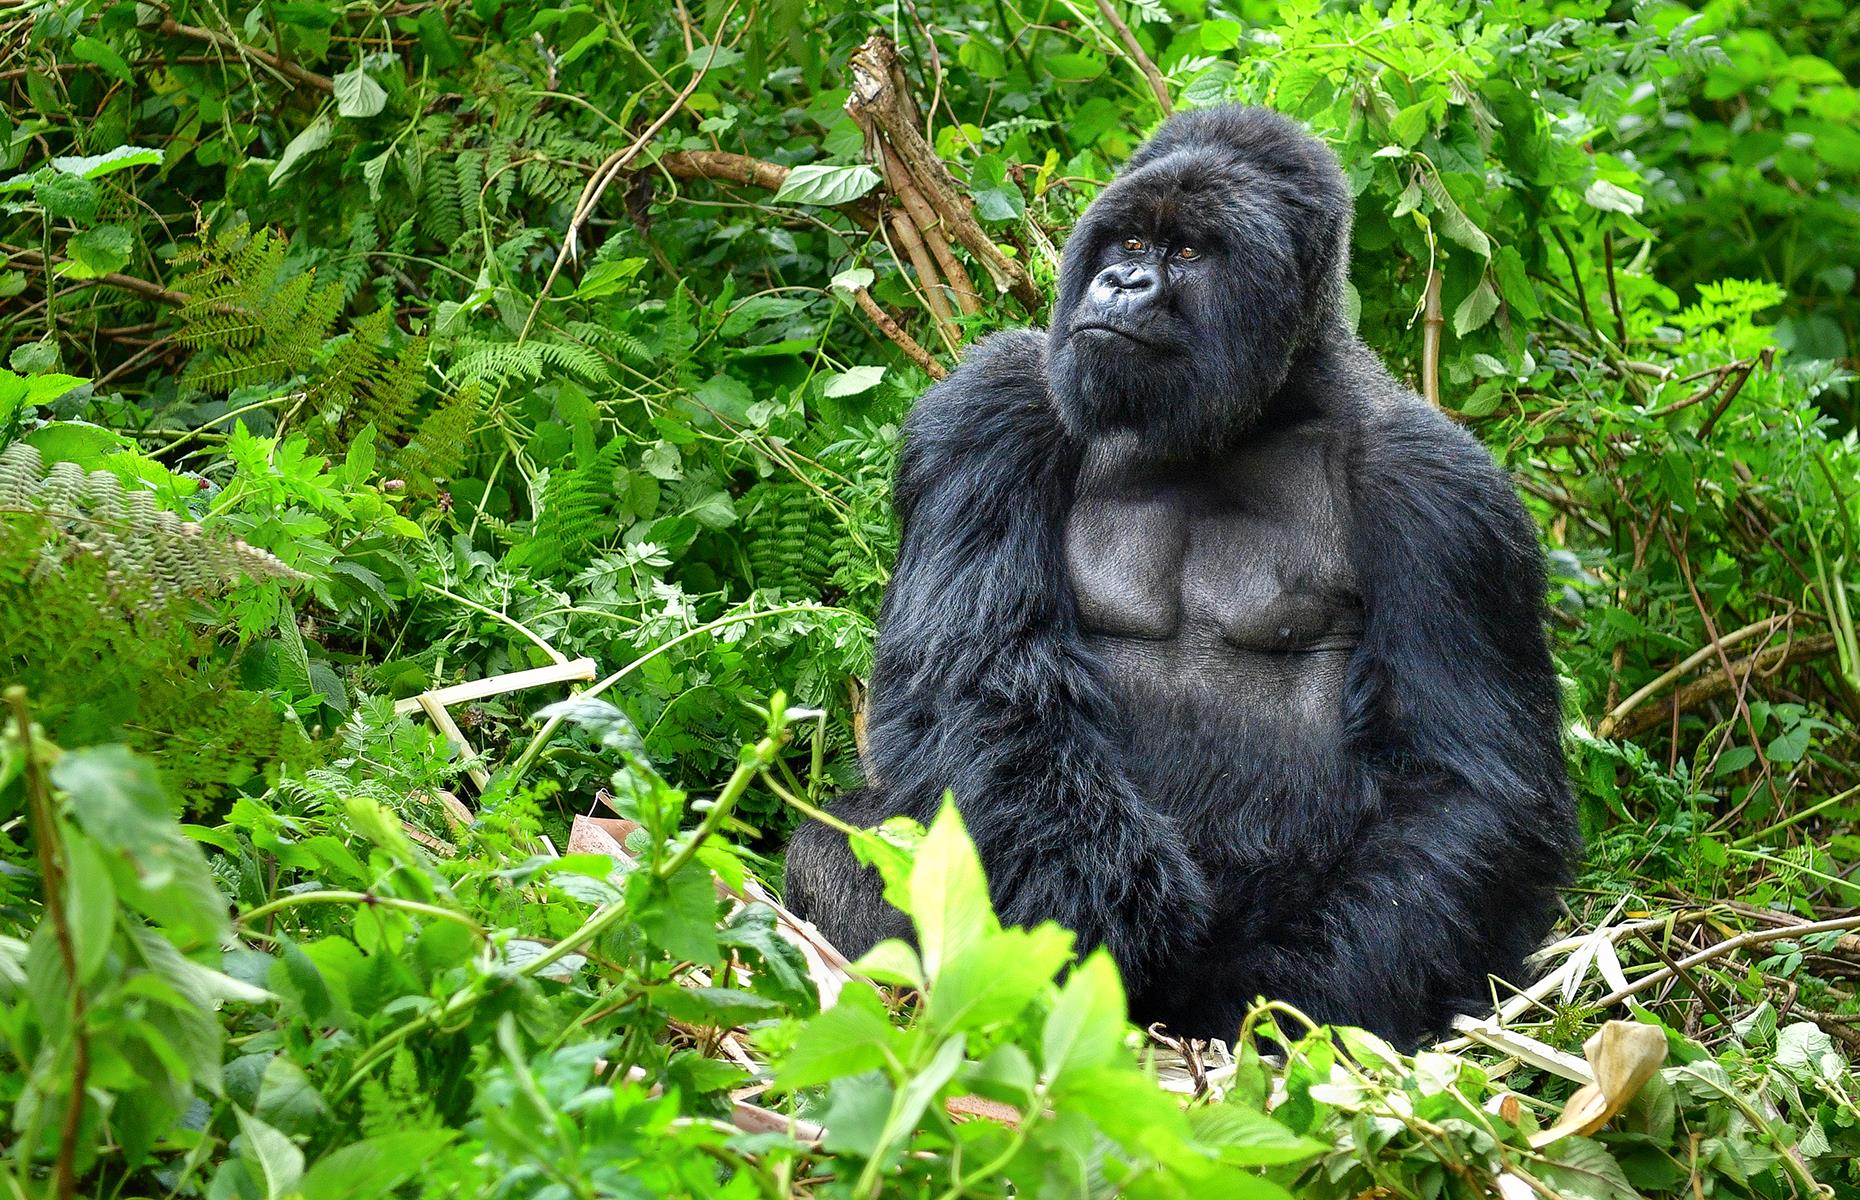 The Virungas, a collection of forest-clad dormant volcanoes in east Africa, is the only place where you can see mountain gorillas in the wild. Join an expert guide at Rwanda's Volcanoes National Park or Uganda's Bwindi Impenetrable Forest and track down a group of these amazing creatures, which you can watch in their natural habitat.